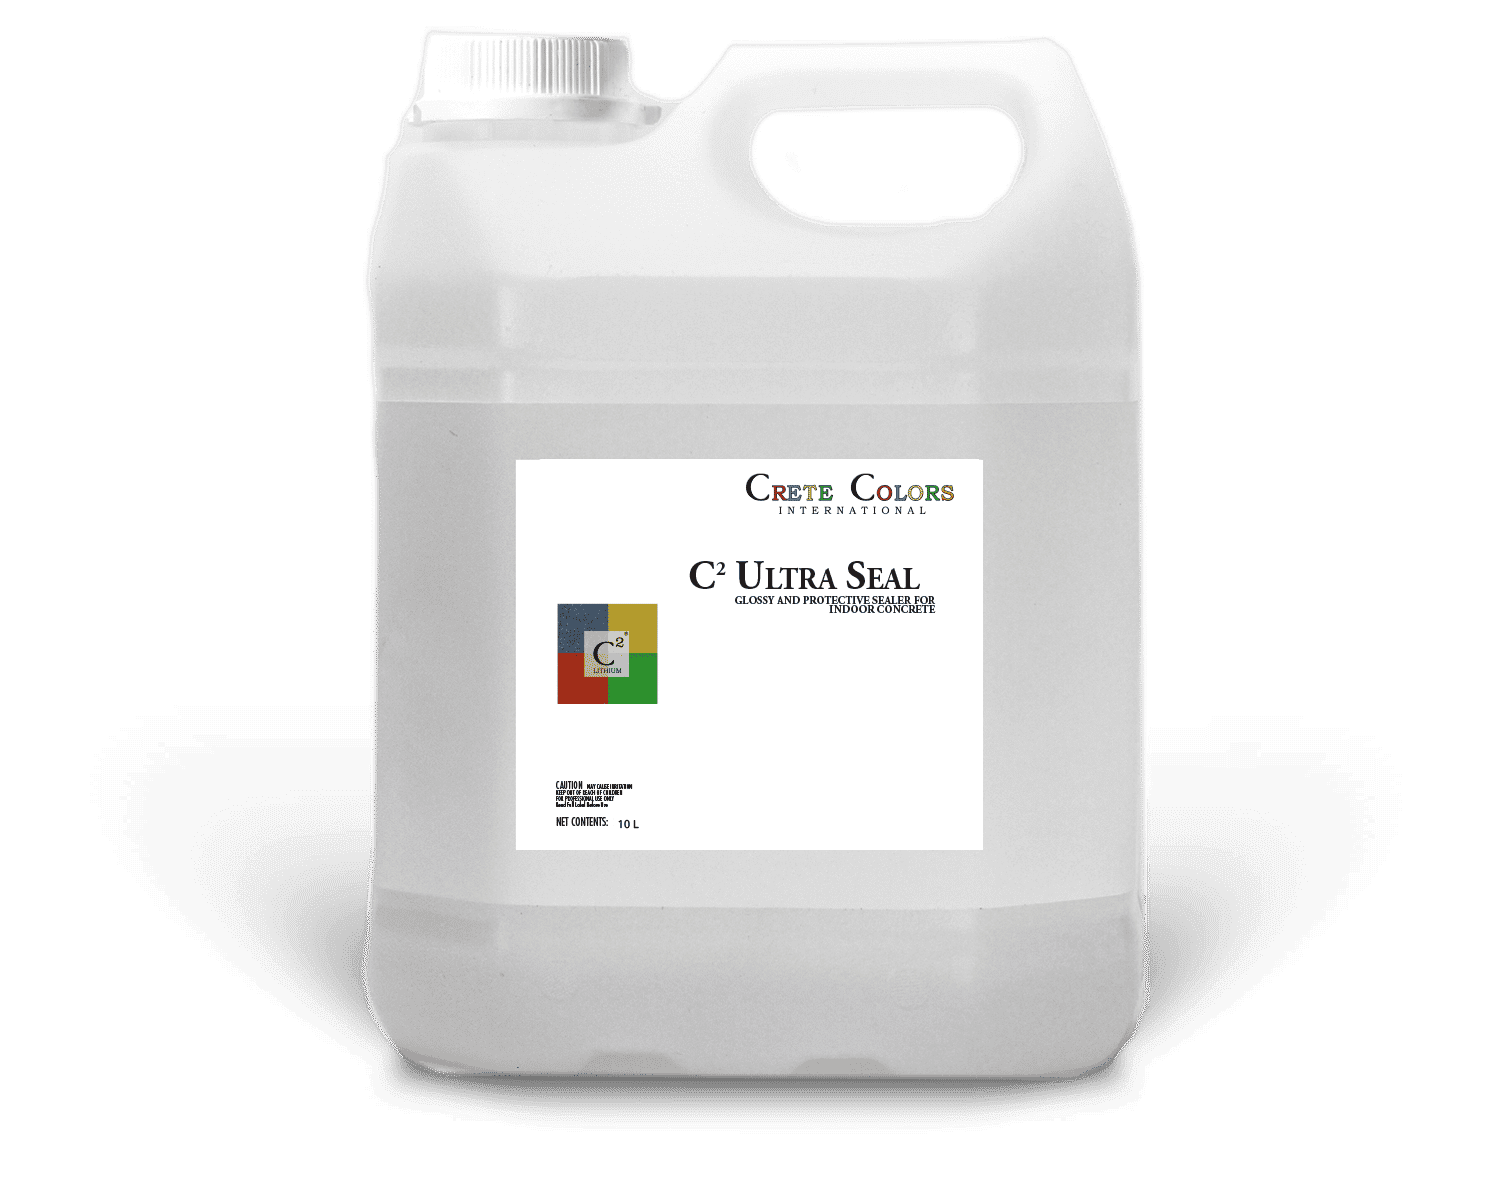 C2 Ultra Seal for concrete floors